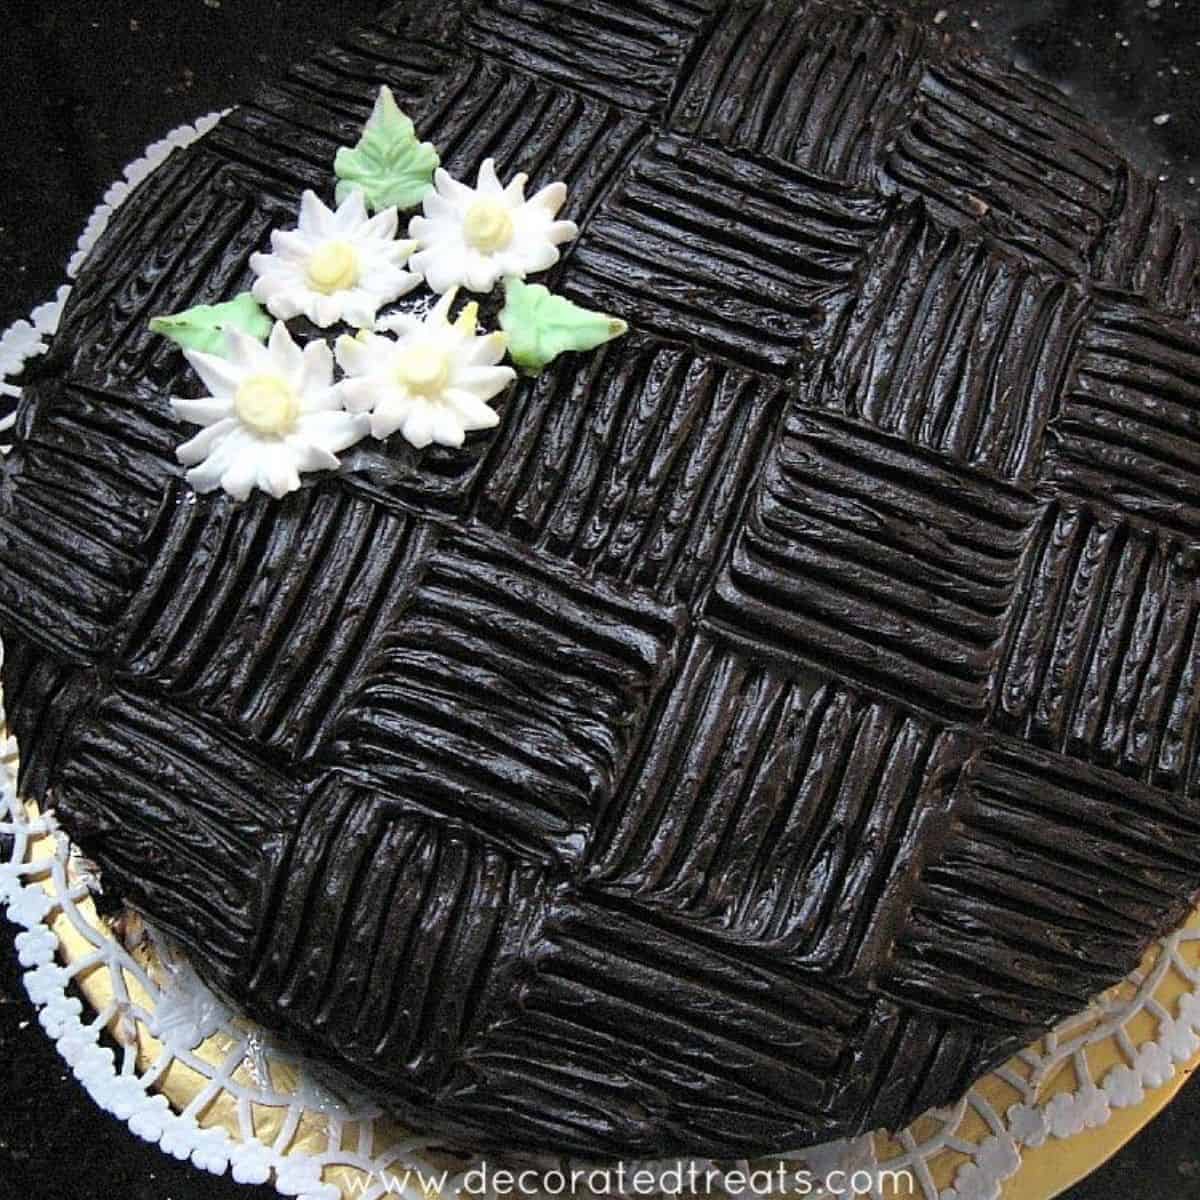 Chocolate cake with wide basket weave pattern and white royal icing daisies